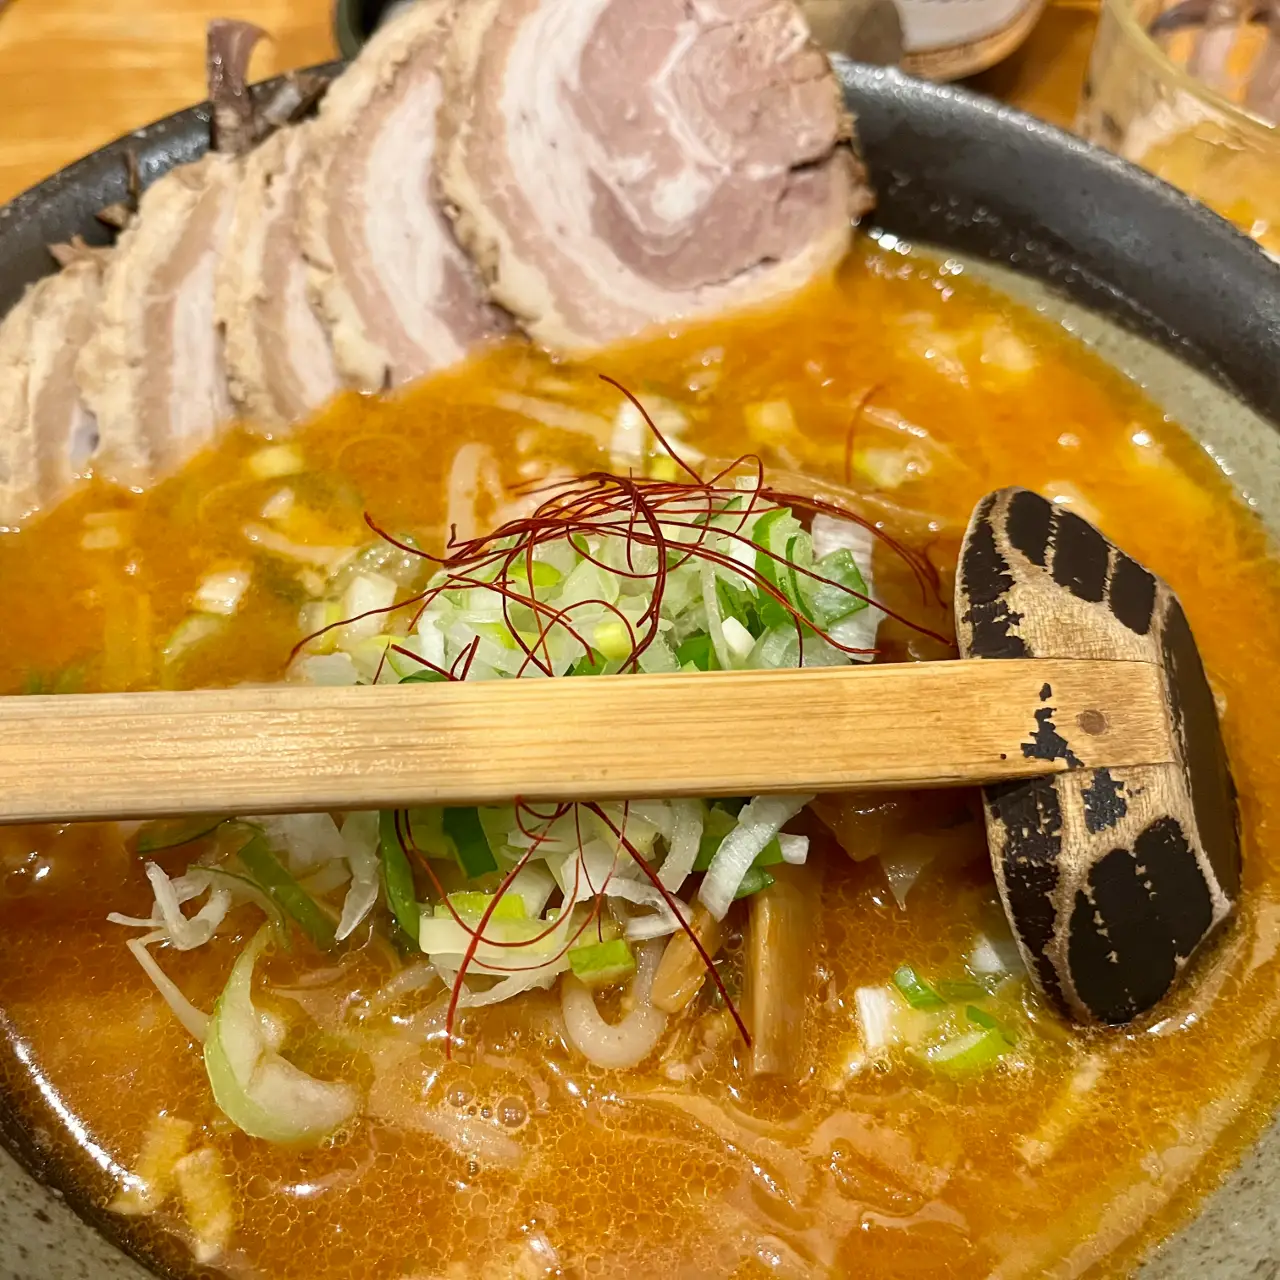 This was the best Sapporo miso ramen I had on the …